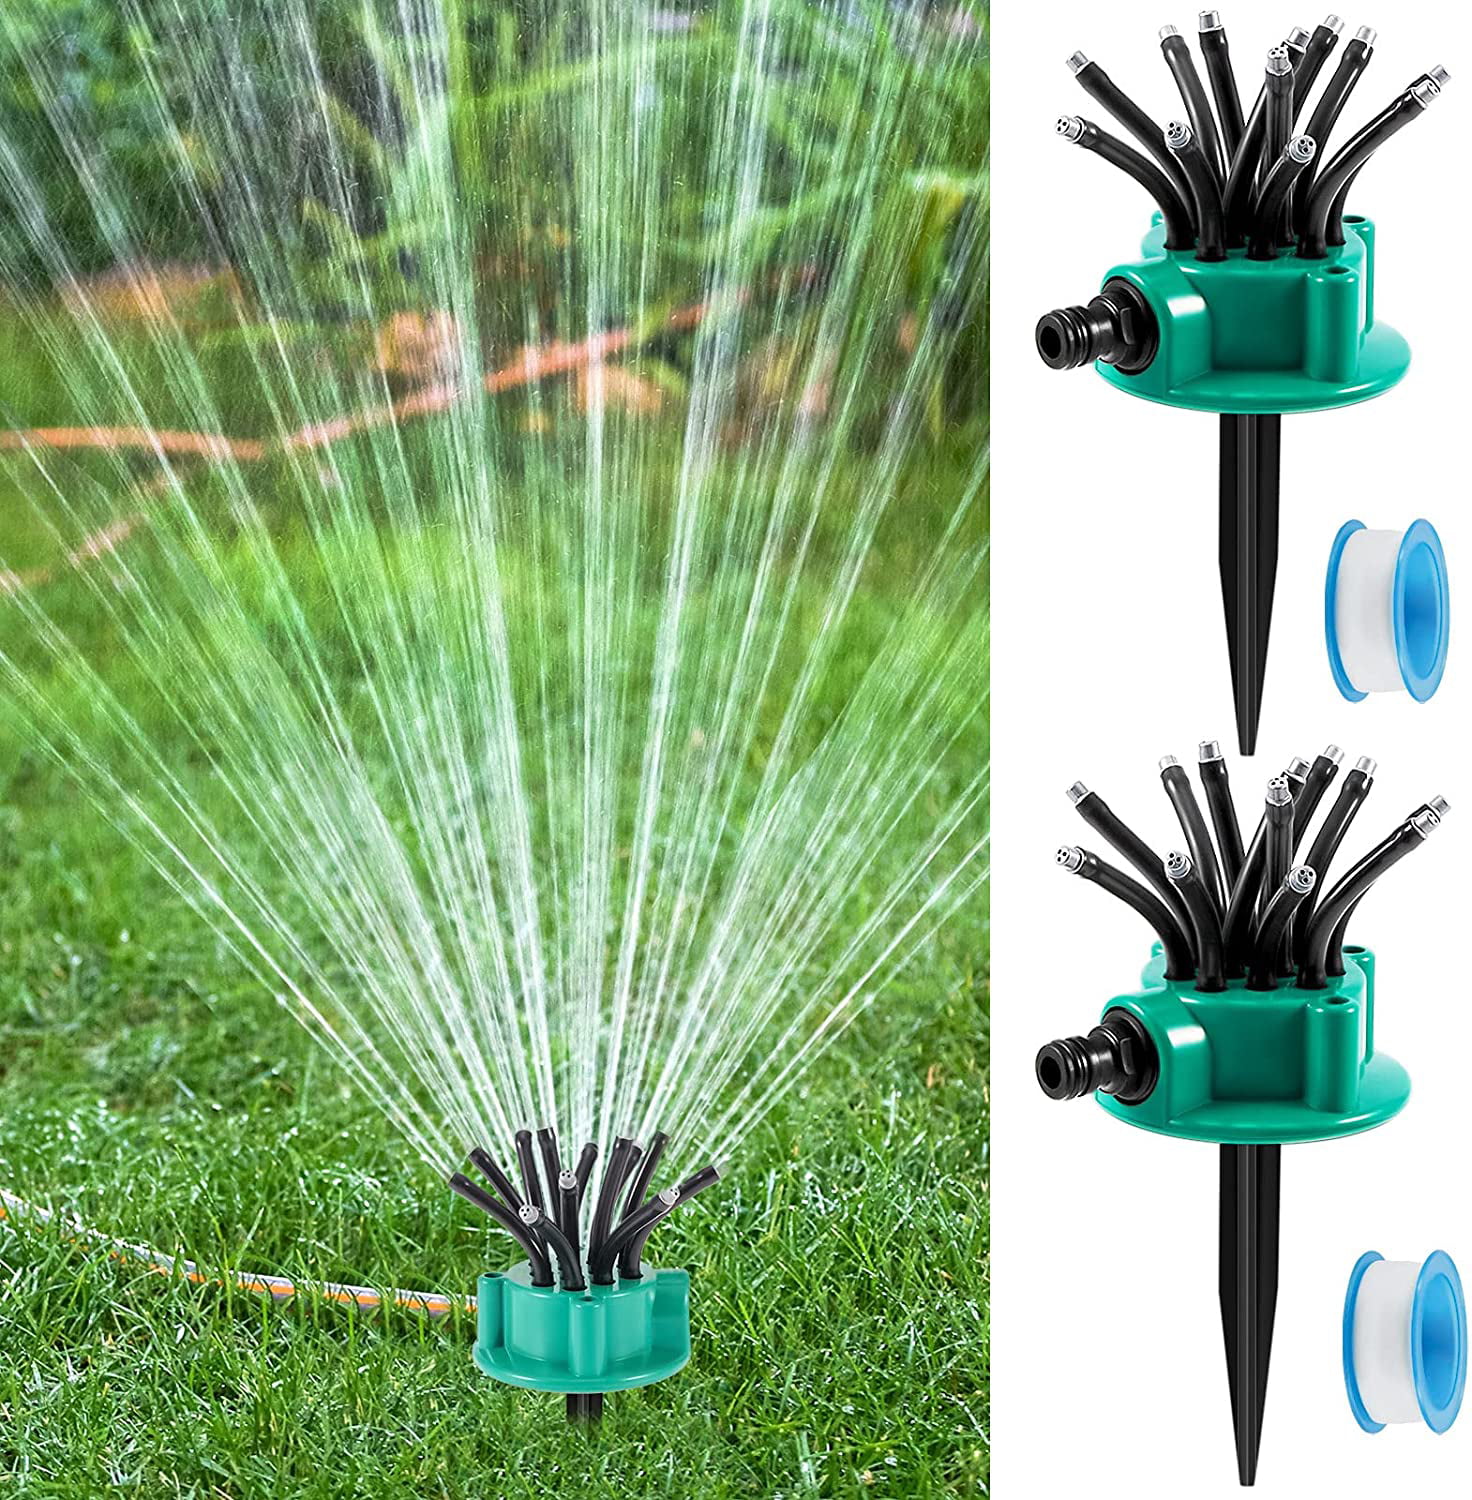 Flexi Hose Mini Oscillating Sprinkler with Pivoting Head Adjustable Spray Angle Adjustable Water Flow and Spray Area Control for Small and Large Lawns and Gardens Up to 3,875 Square Feet 